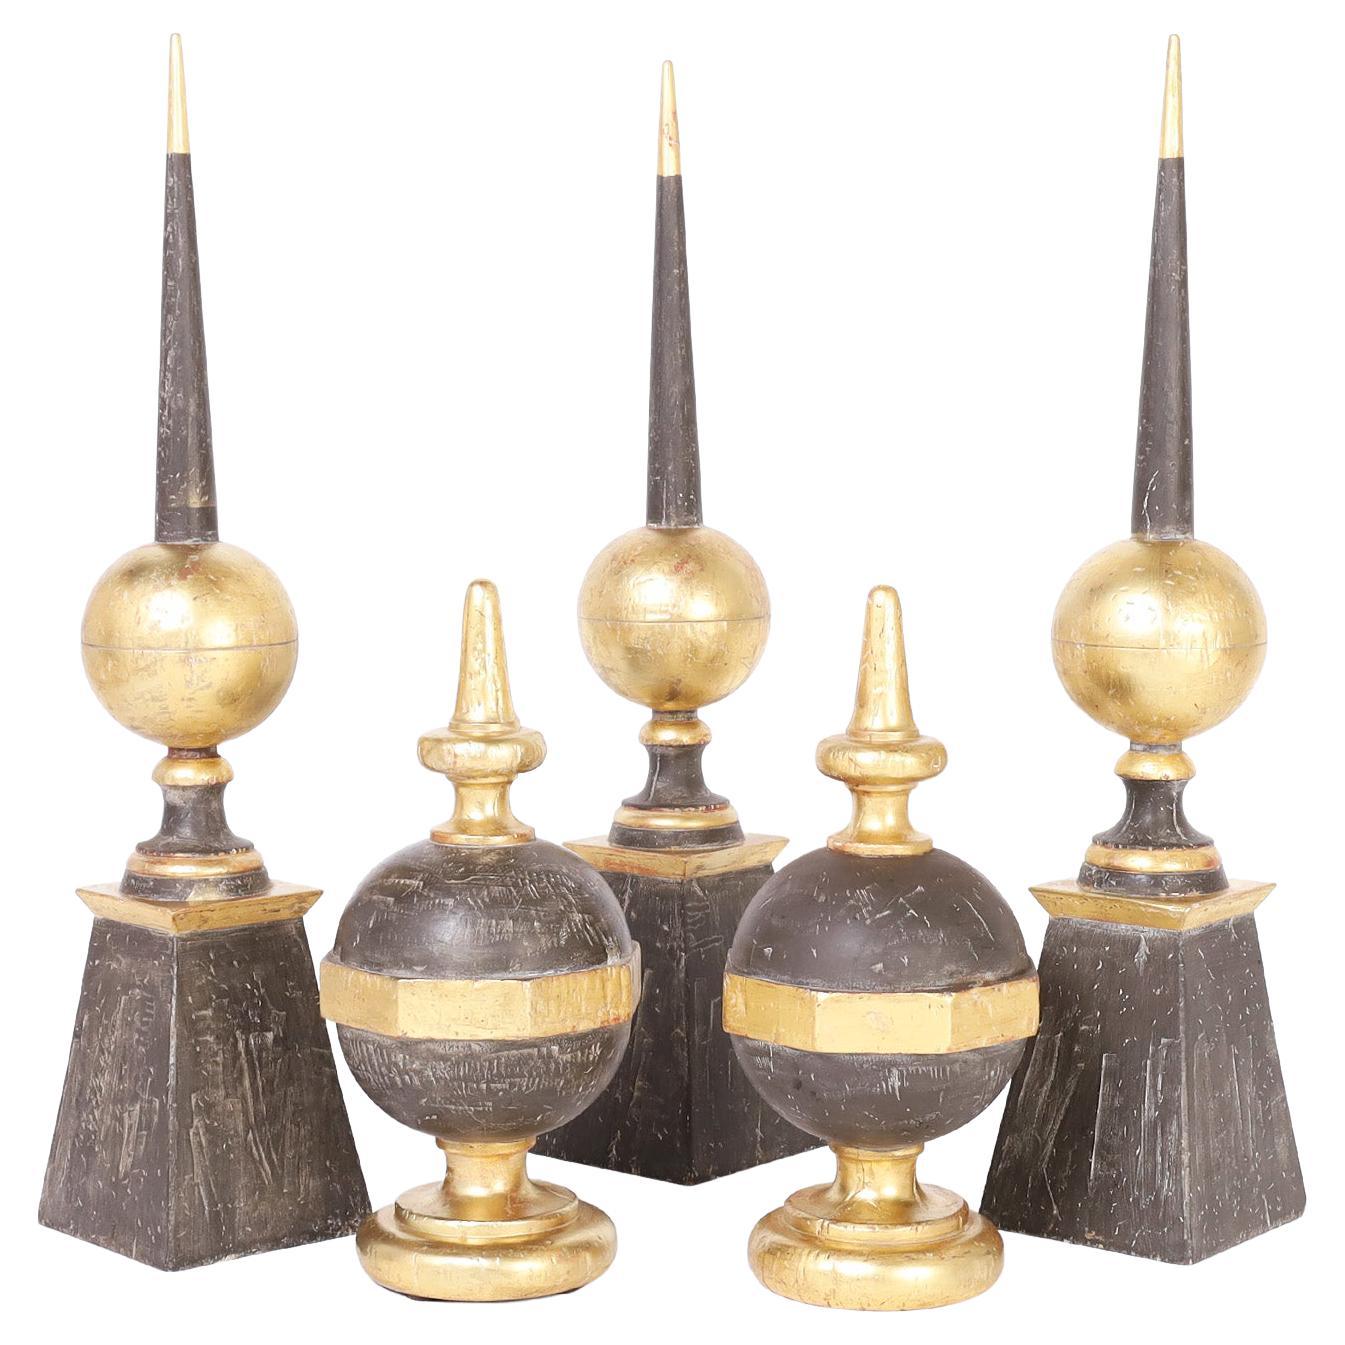 Collection of Five Las Palmas Wood Finials, Priced Individually